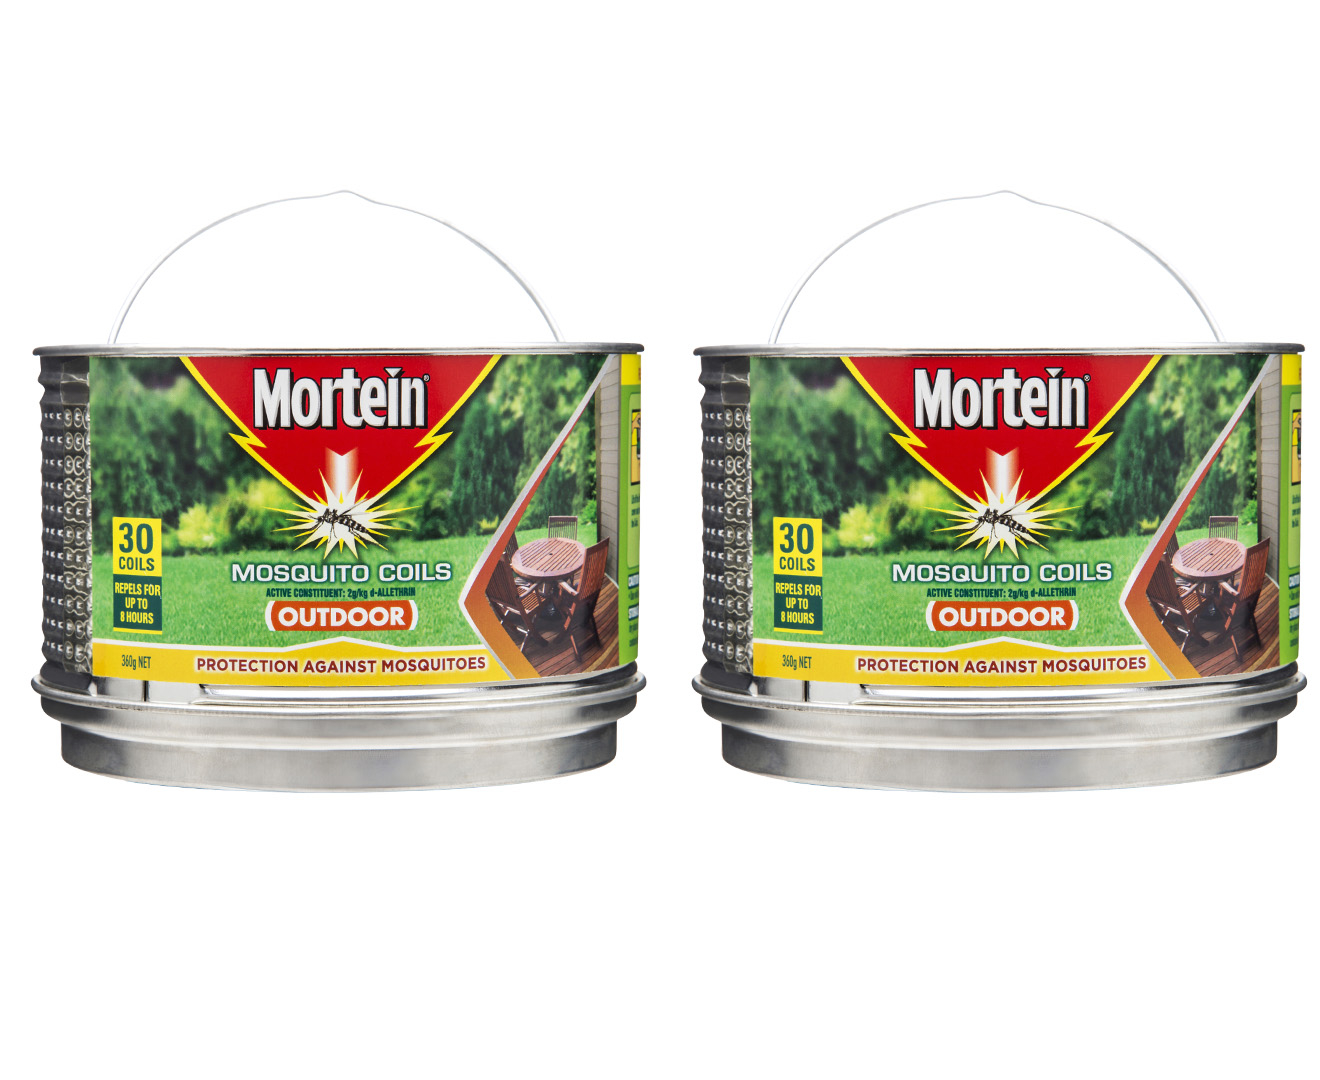 2 x Mortein Outdoor Mosquito Coils 30-Pack 360g